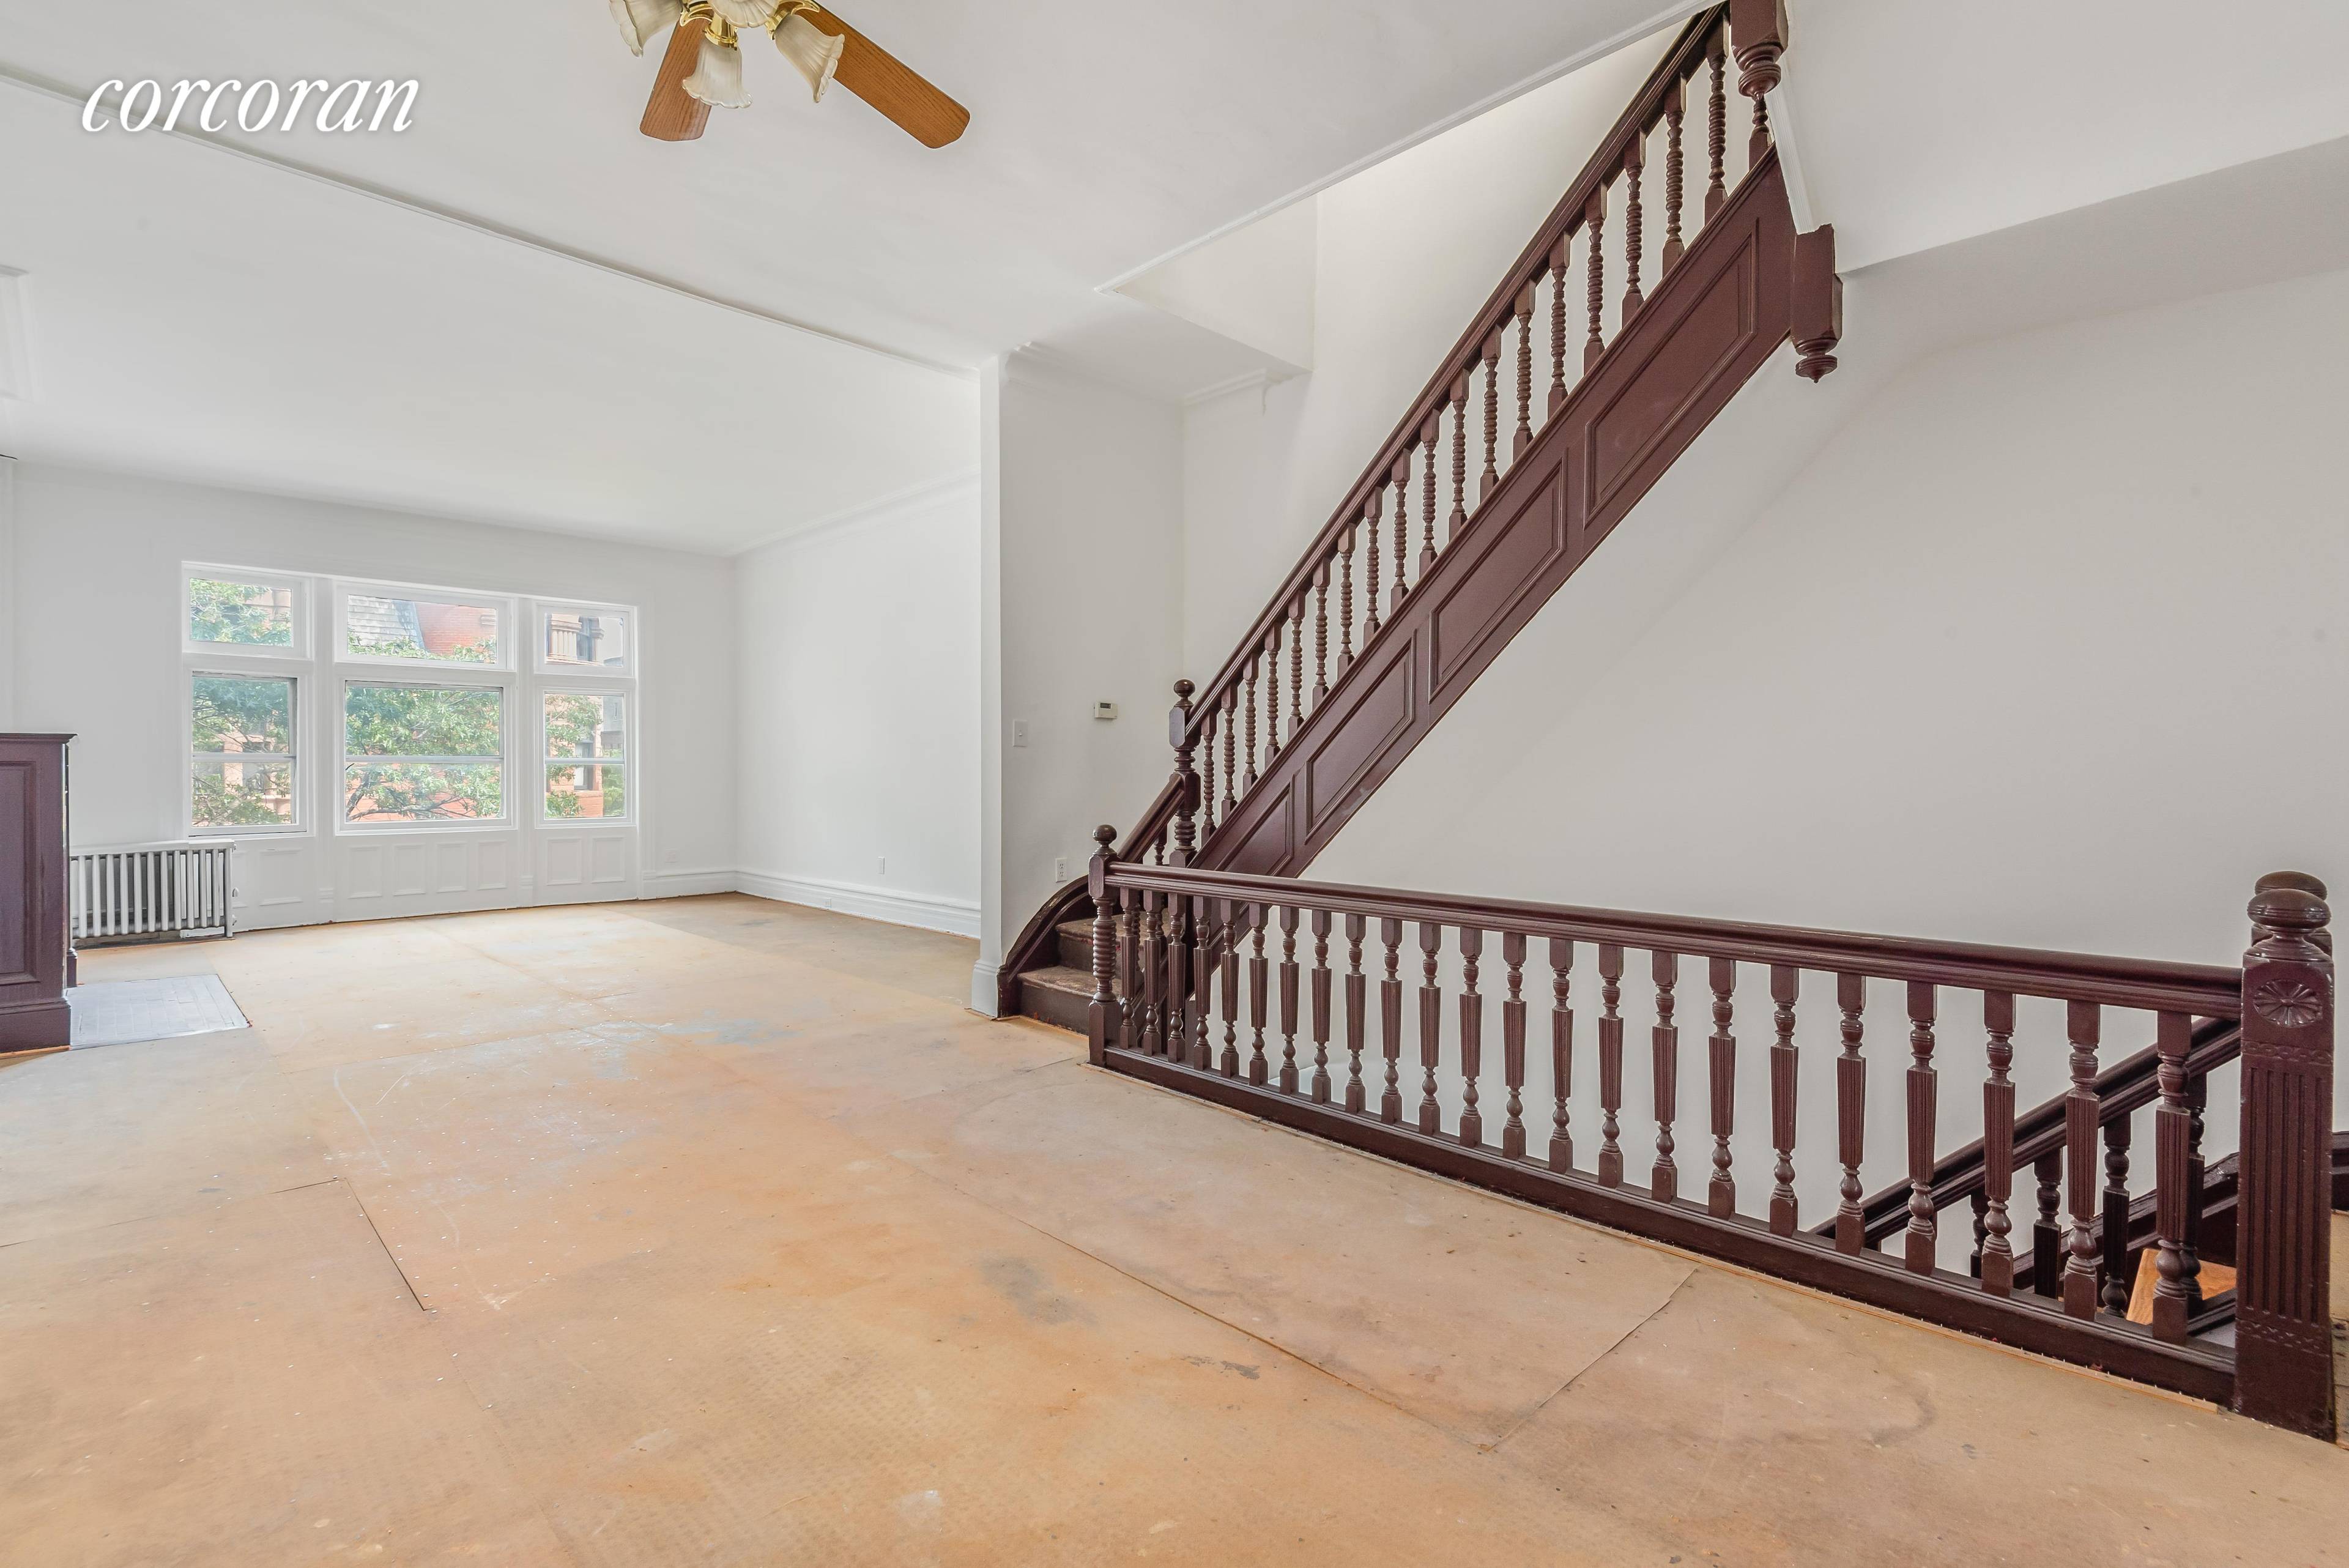 Welcome to 288 Dekalb Ave, the perfect blank canvas for anyone who dreams of renovating their own home.